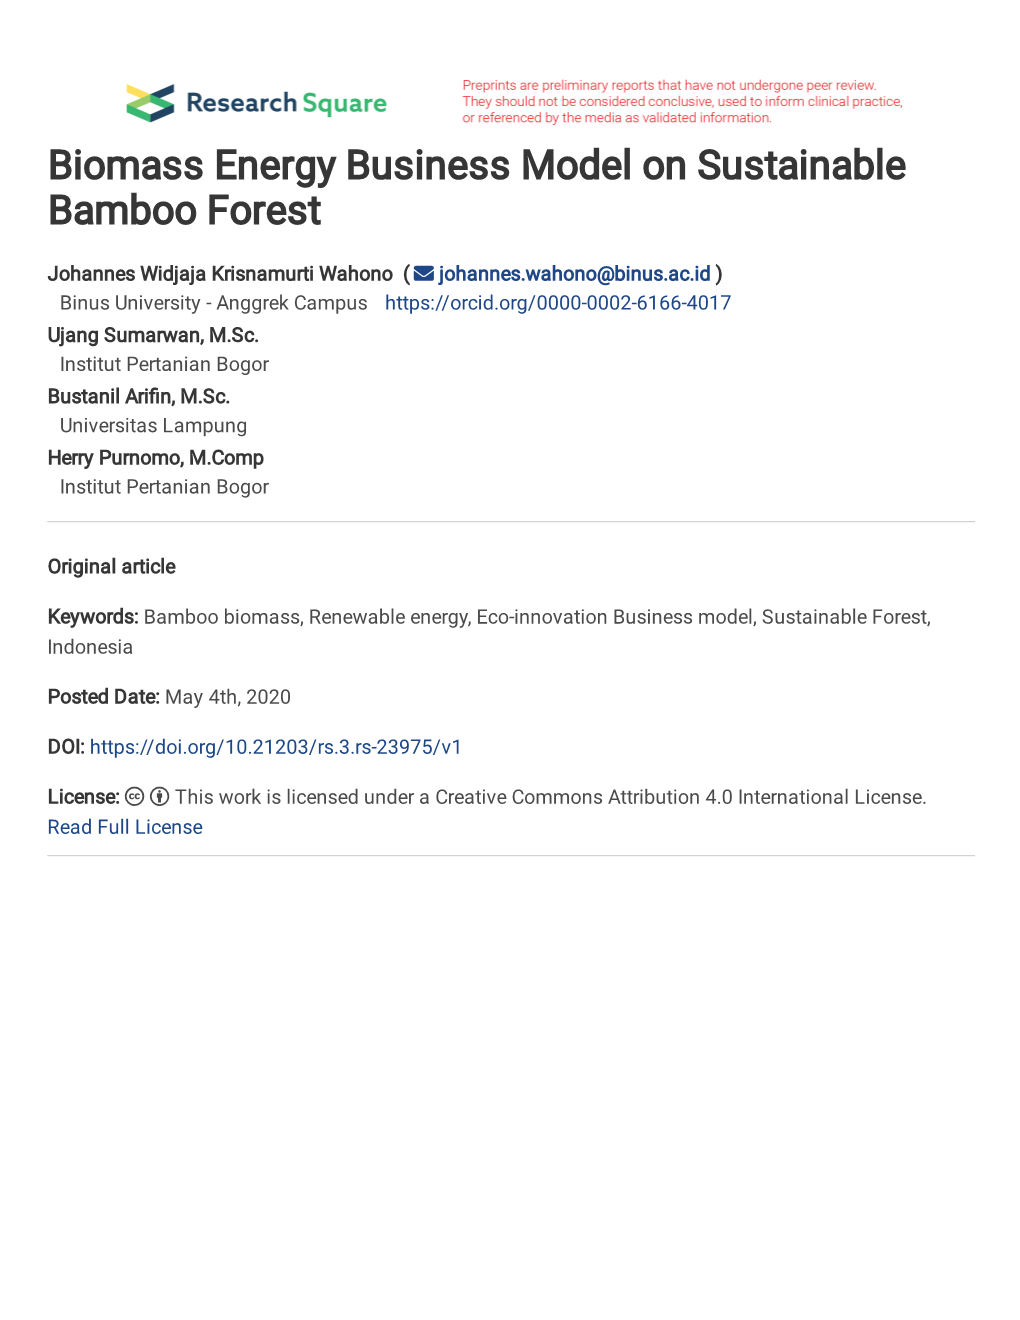 Biomass Energy Business Model on Sustainable Bamboo Forest